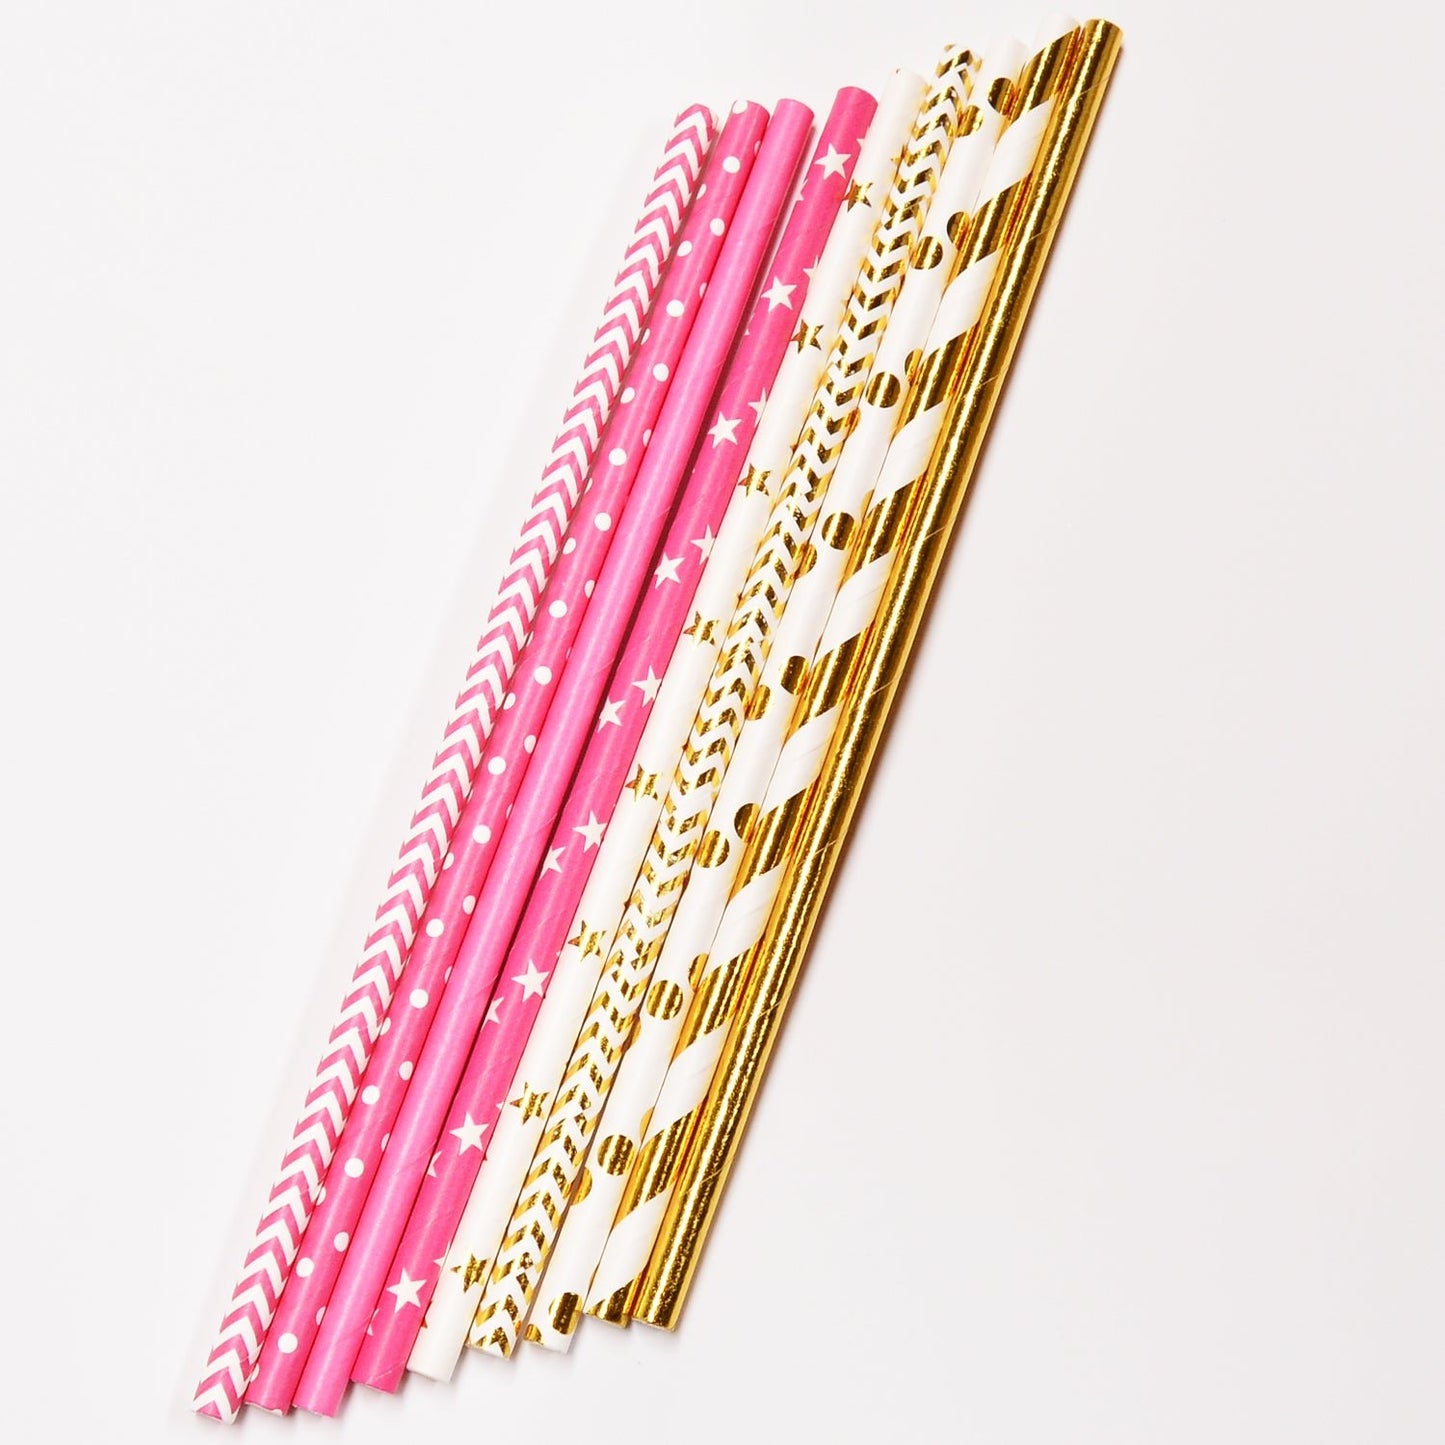 50 Pink and Gold Paper Straws, Pink Straws, Gold Straws, Princess Party Straws -princess-princess baby shower